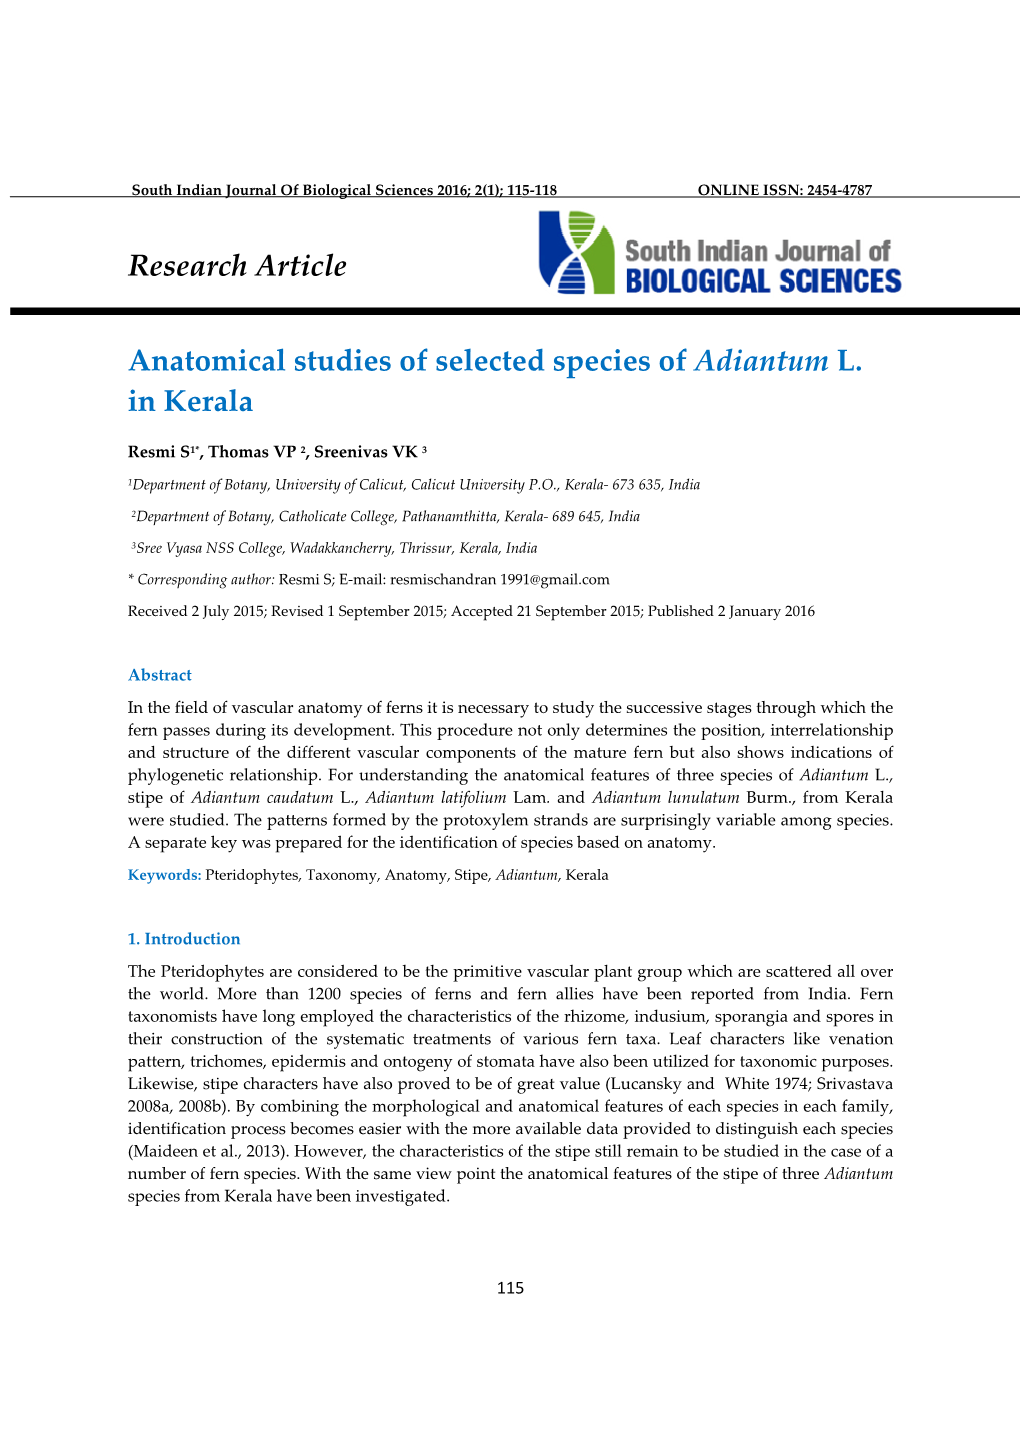 Research Article Anatomical Studies of Selected Species of Adiantum L. In